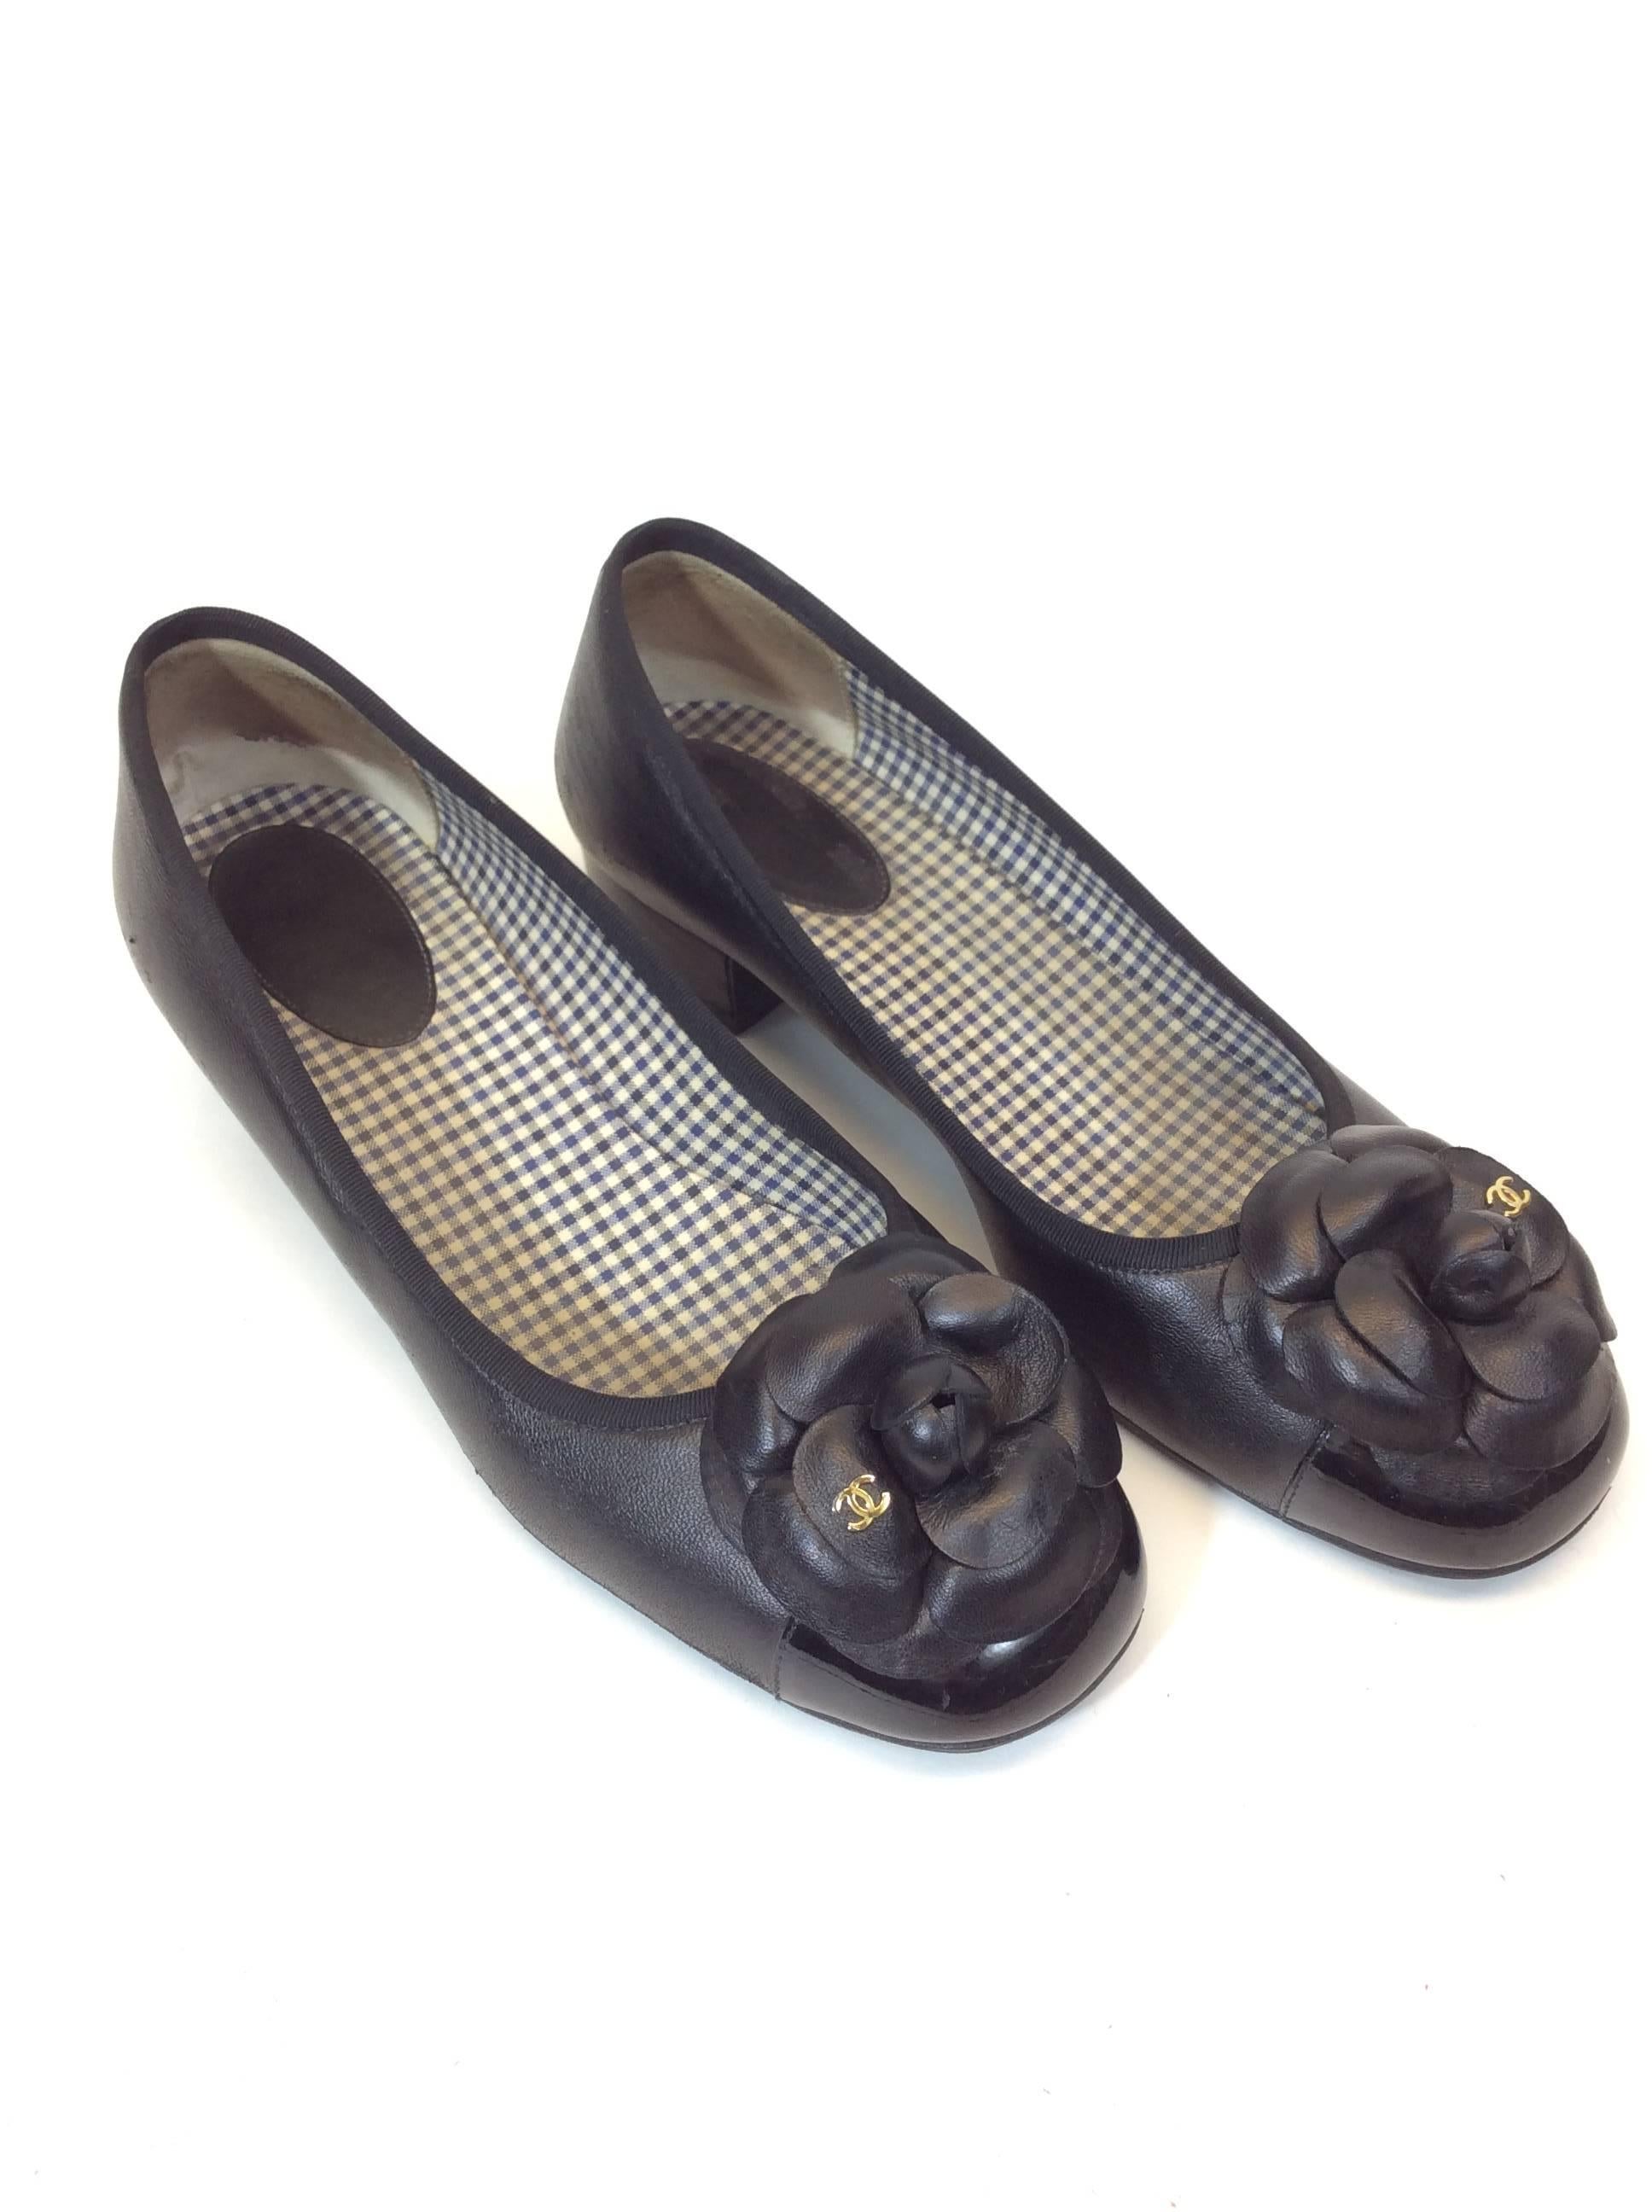 Chanel Black Leather Small Heel With Flower on Toe In Excellent Condition For Sale In Narberth, PA